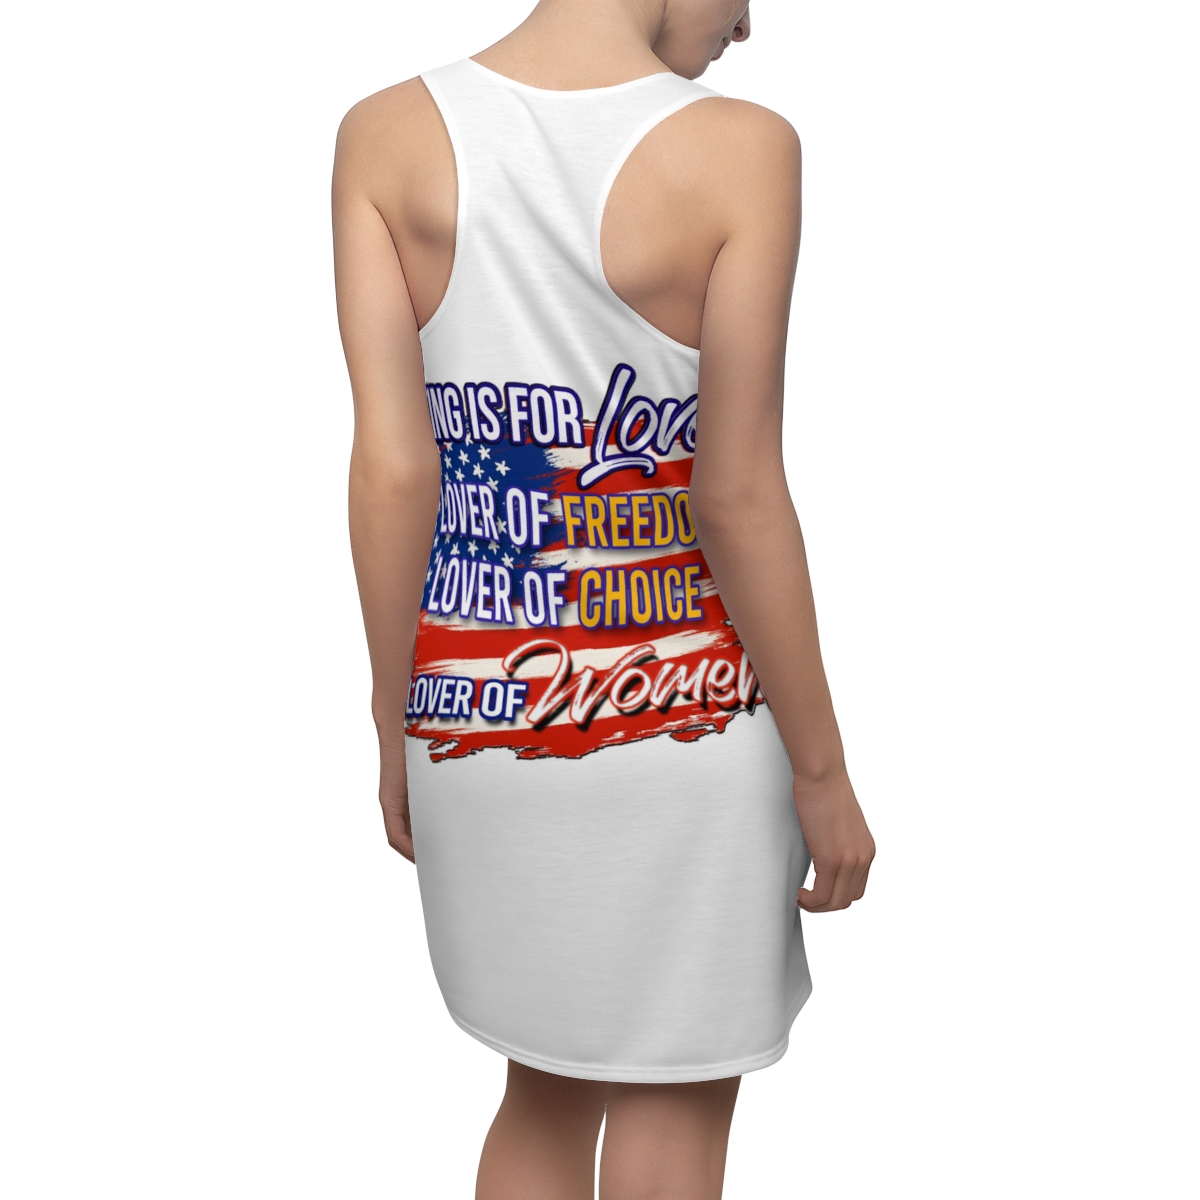 Lover of Women Front and Back Women's Cut & Sew Racerback Dress (AOP) product thumbnail image